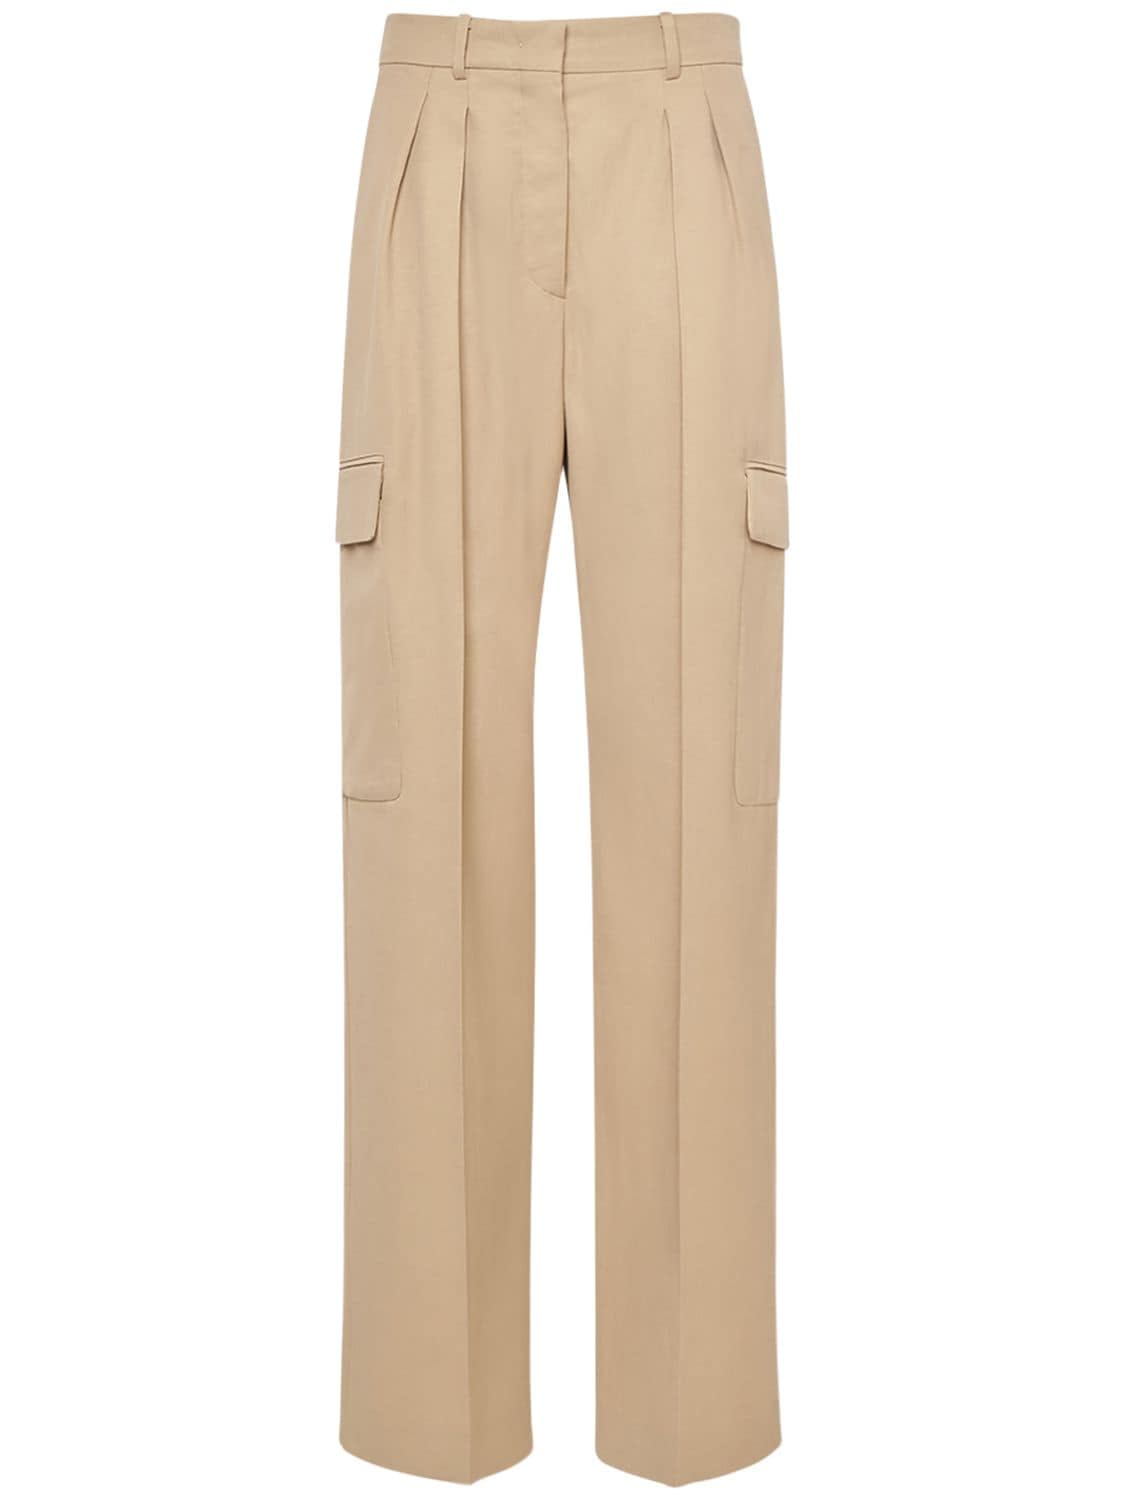 Sportmax Jacopo Cotton Blend Twill Cargo Pants In Camel